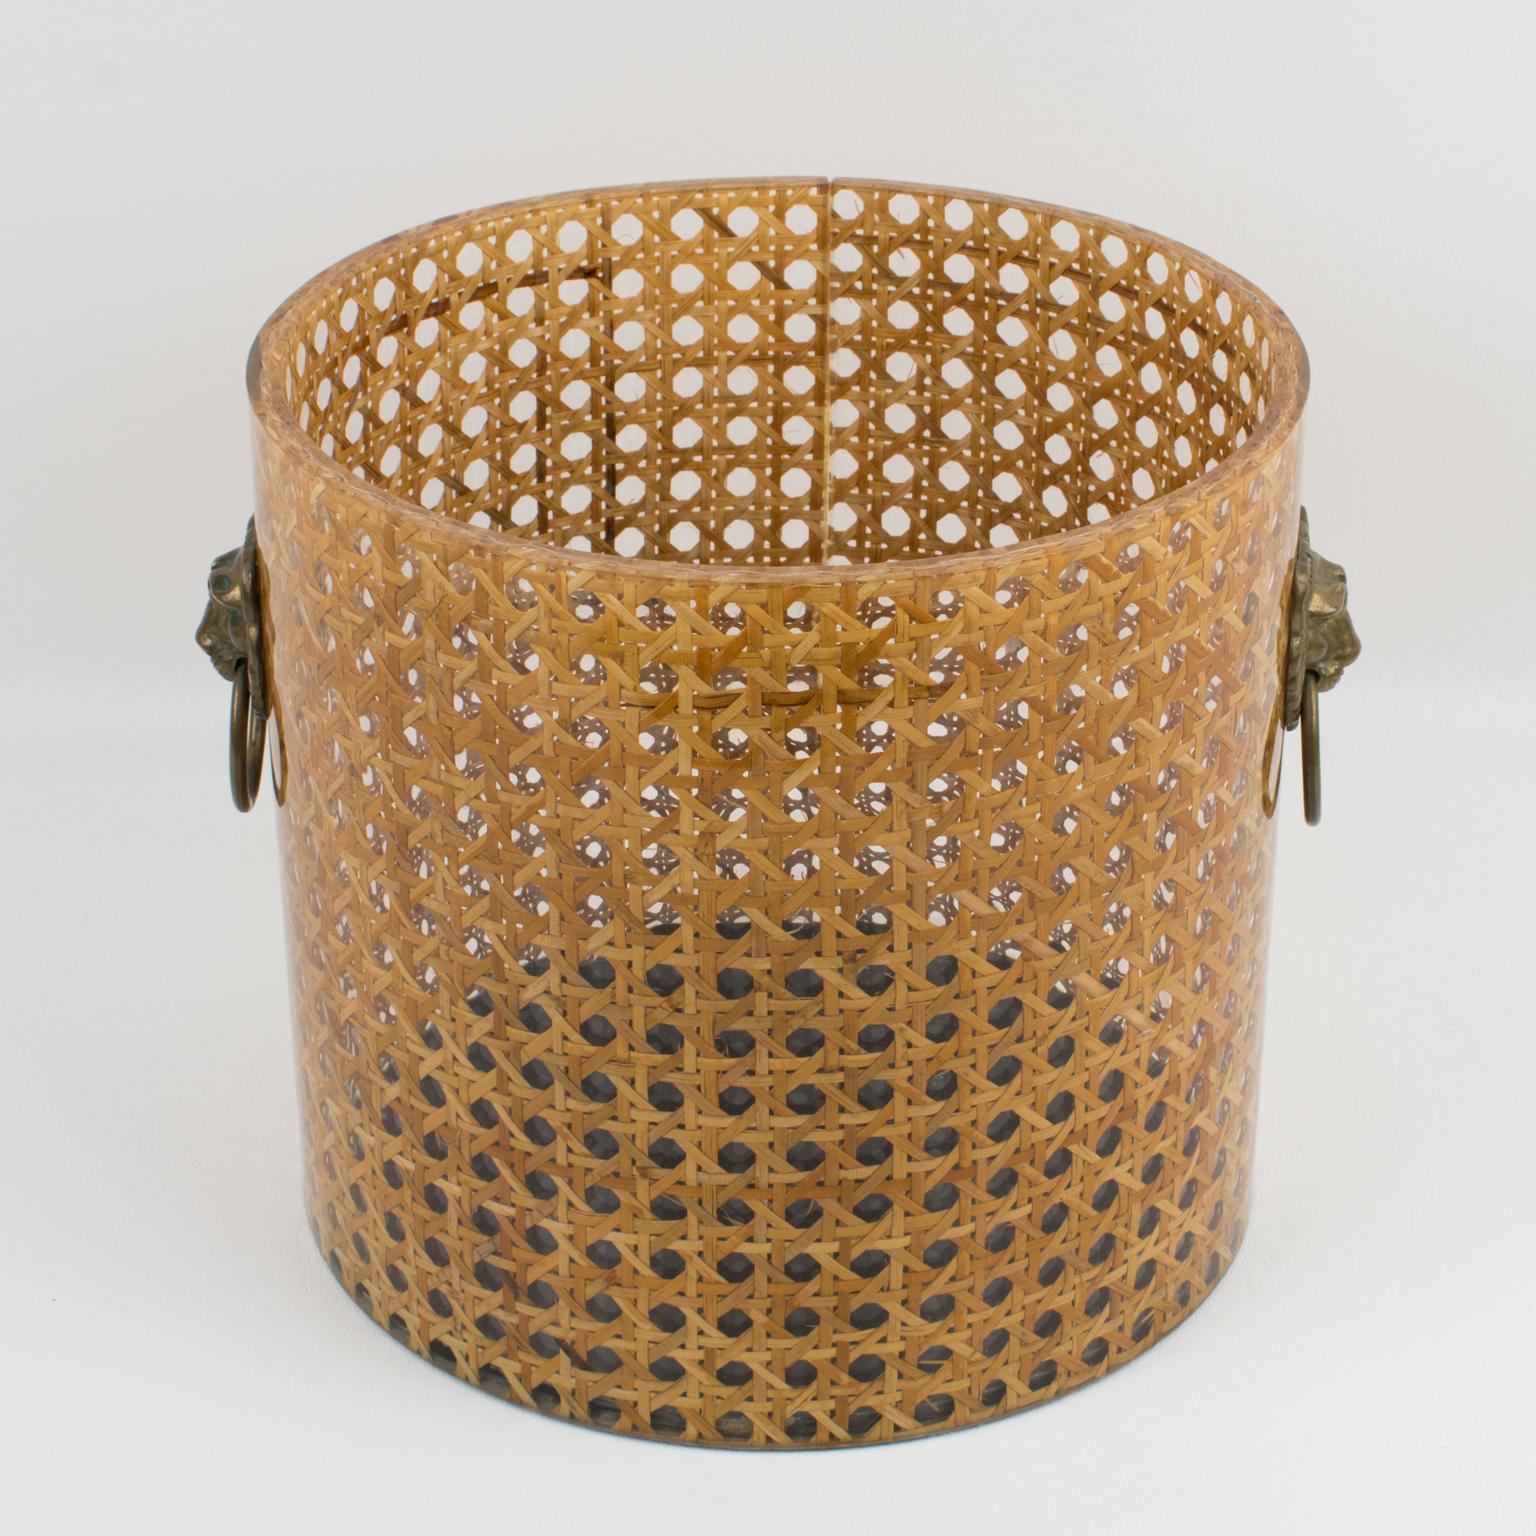 Lovely wastebasket or planter designed by Christian Dior for his Home Collection in the 1970s. Rounded shape with real rattan cane work embedded in the crystal clear Lucite. Two brass handles on sides with lion head carving and ring. Great desk or